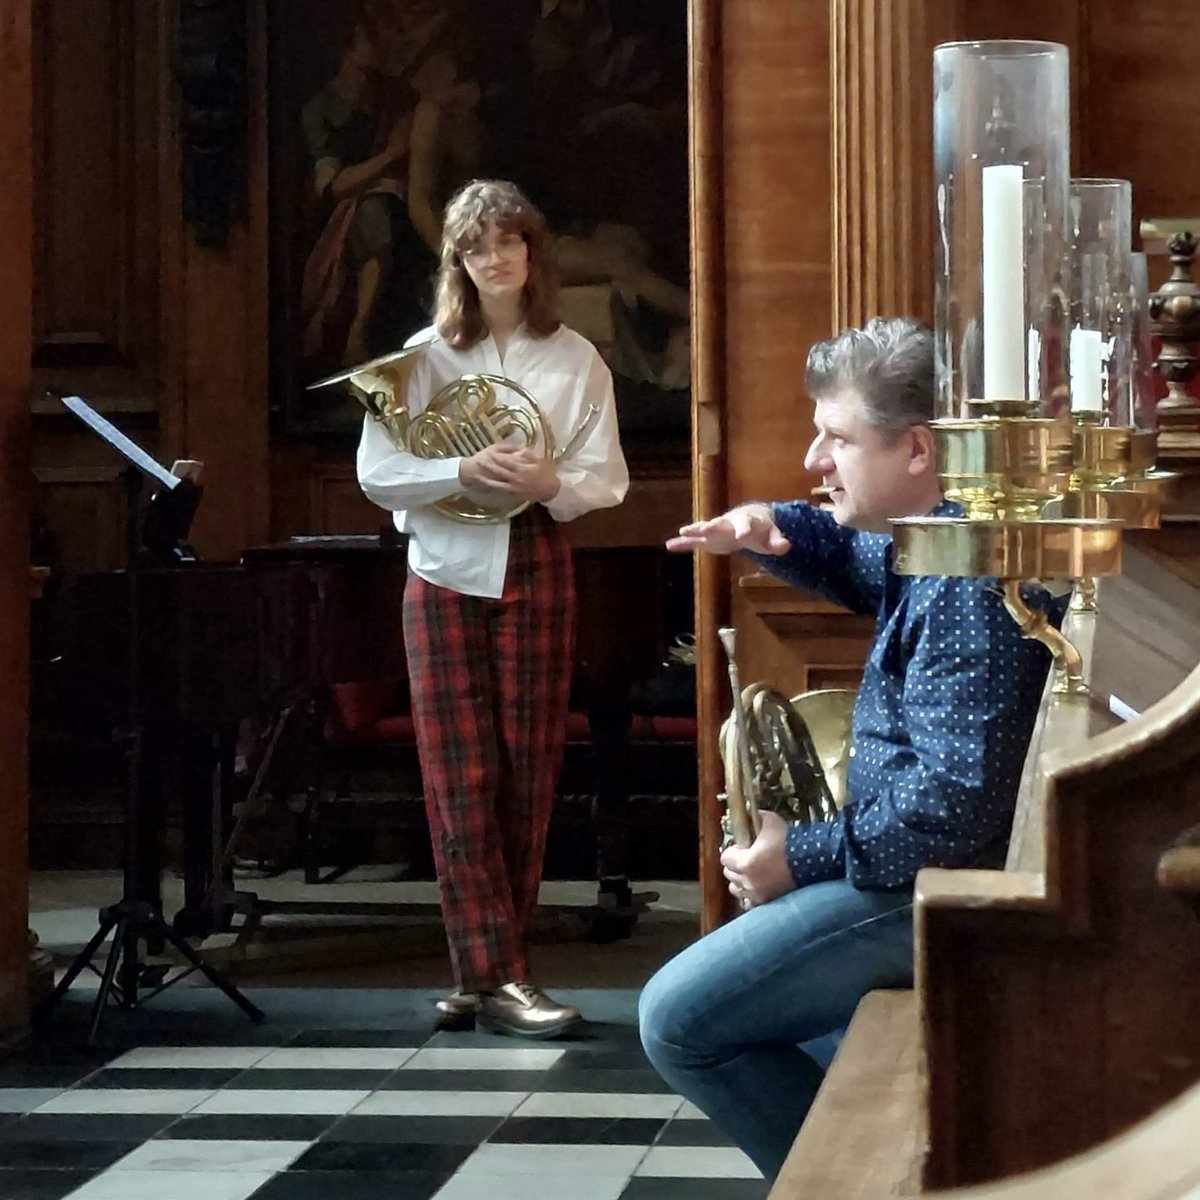 We had a fantastic horn masterclass led by Radek Baborák yesterday 📯 Pictured here with University of Oxford students Tommaso Rusconi (Jesus College) and Alice Knight (St Anne’s College). This was our first masterclass of the season! Thank you to all who joined us 🎶